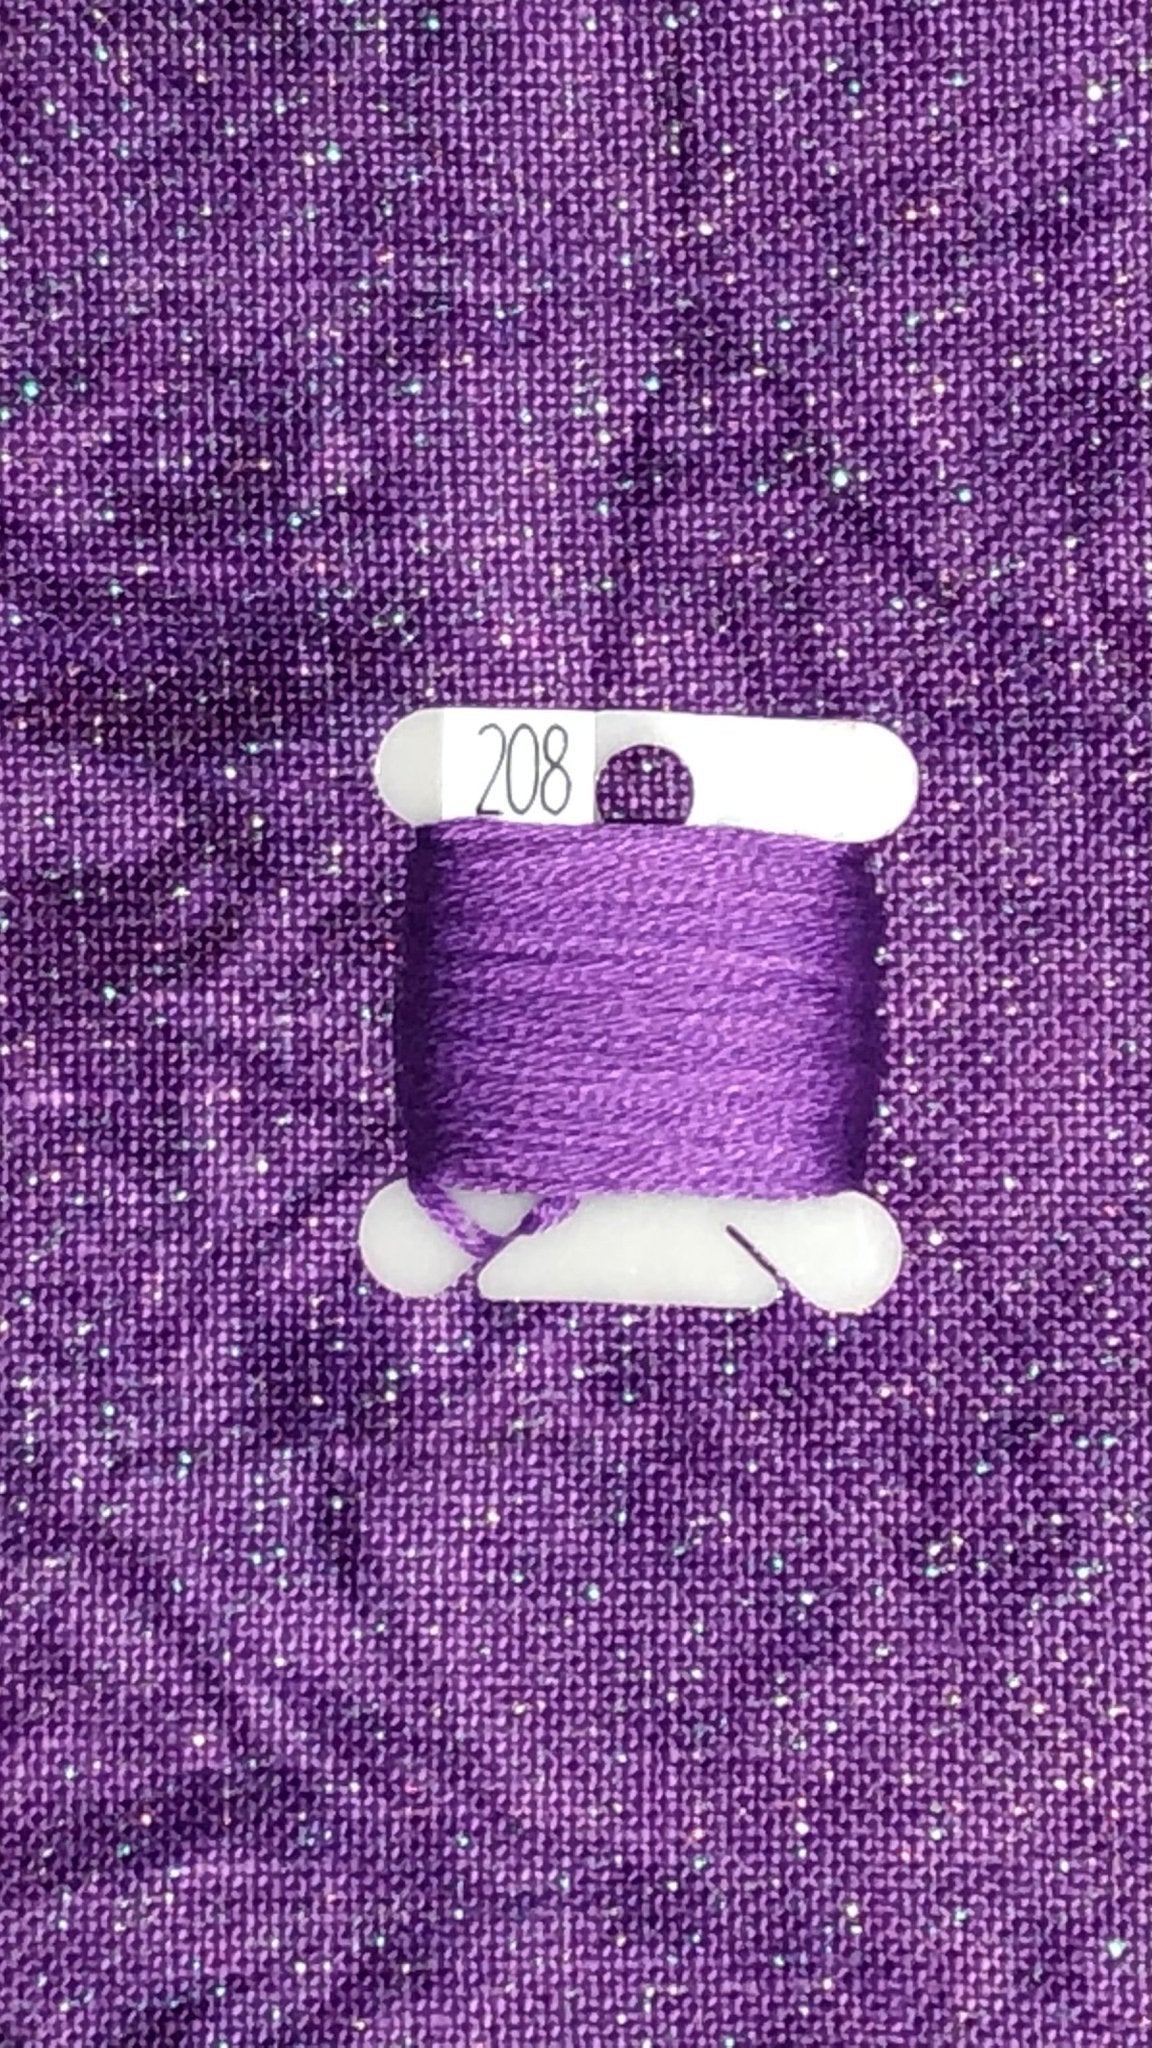 Linen - Petal Pansy - Dark - Dyeing for Cross Stitch